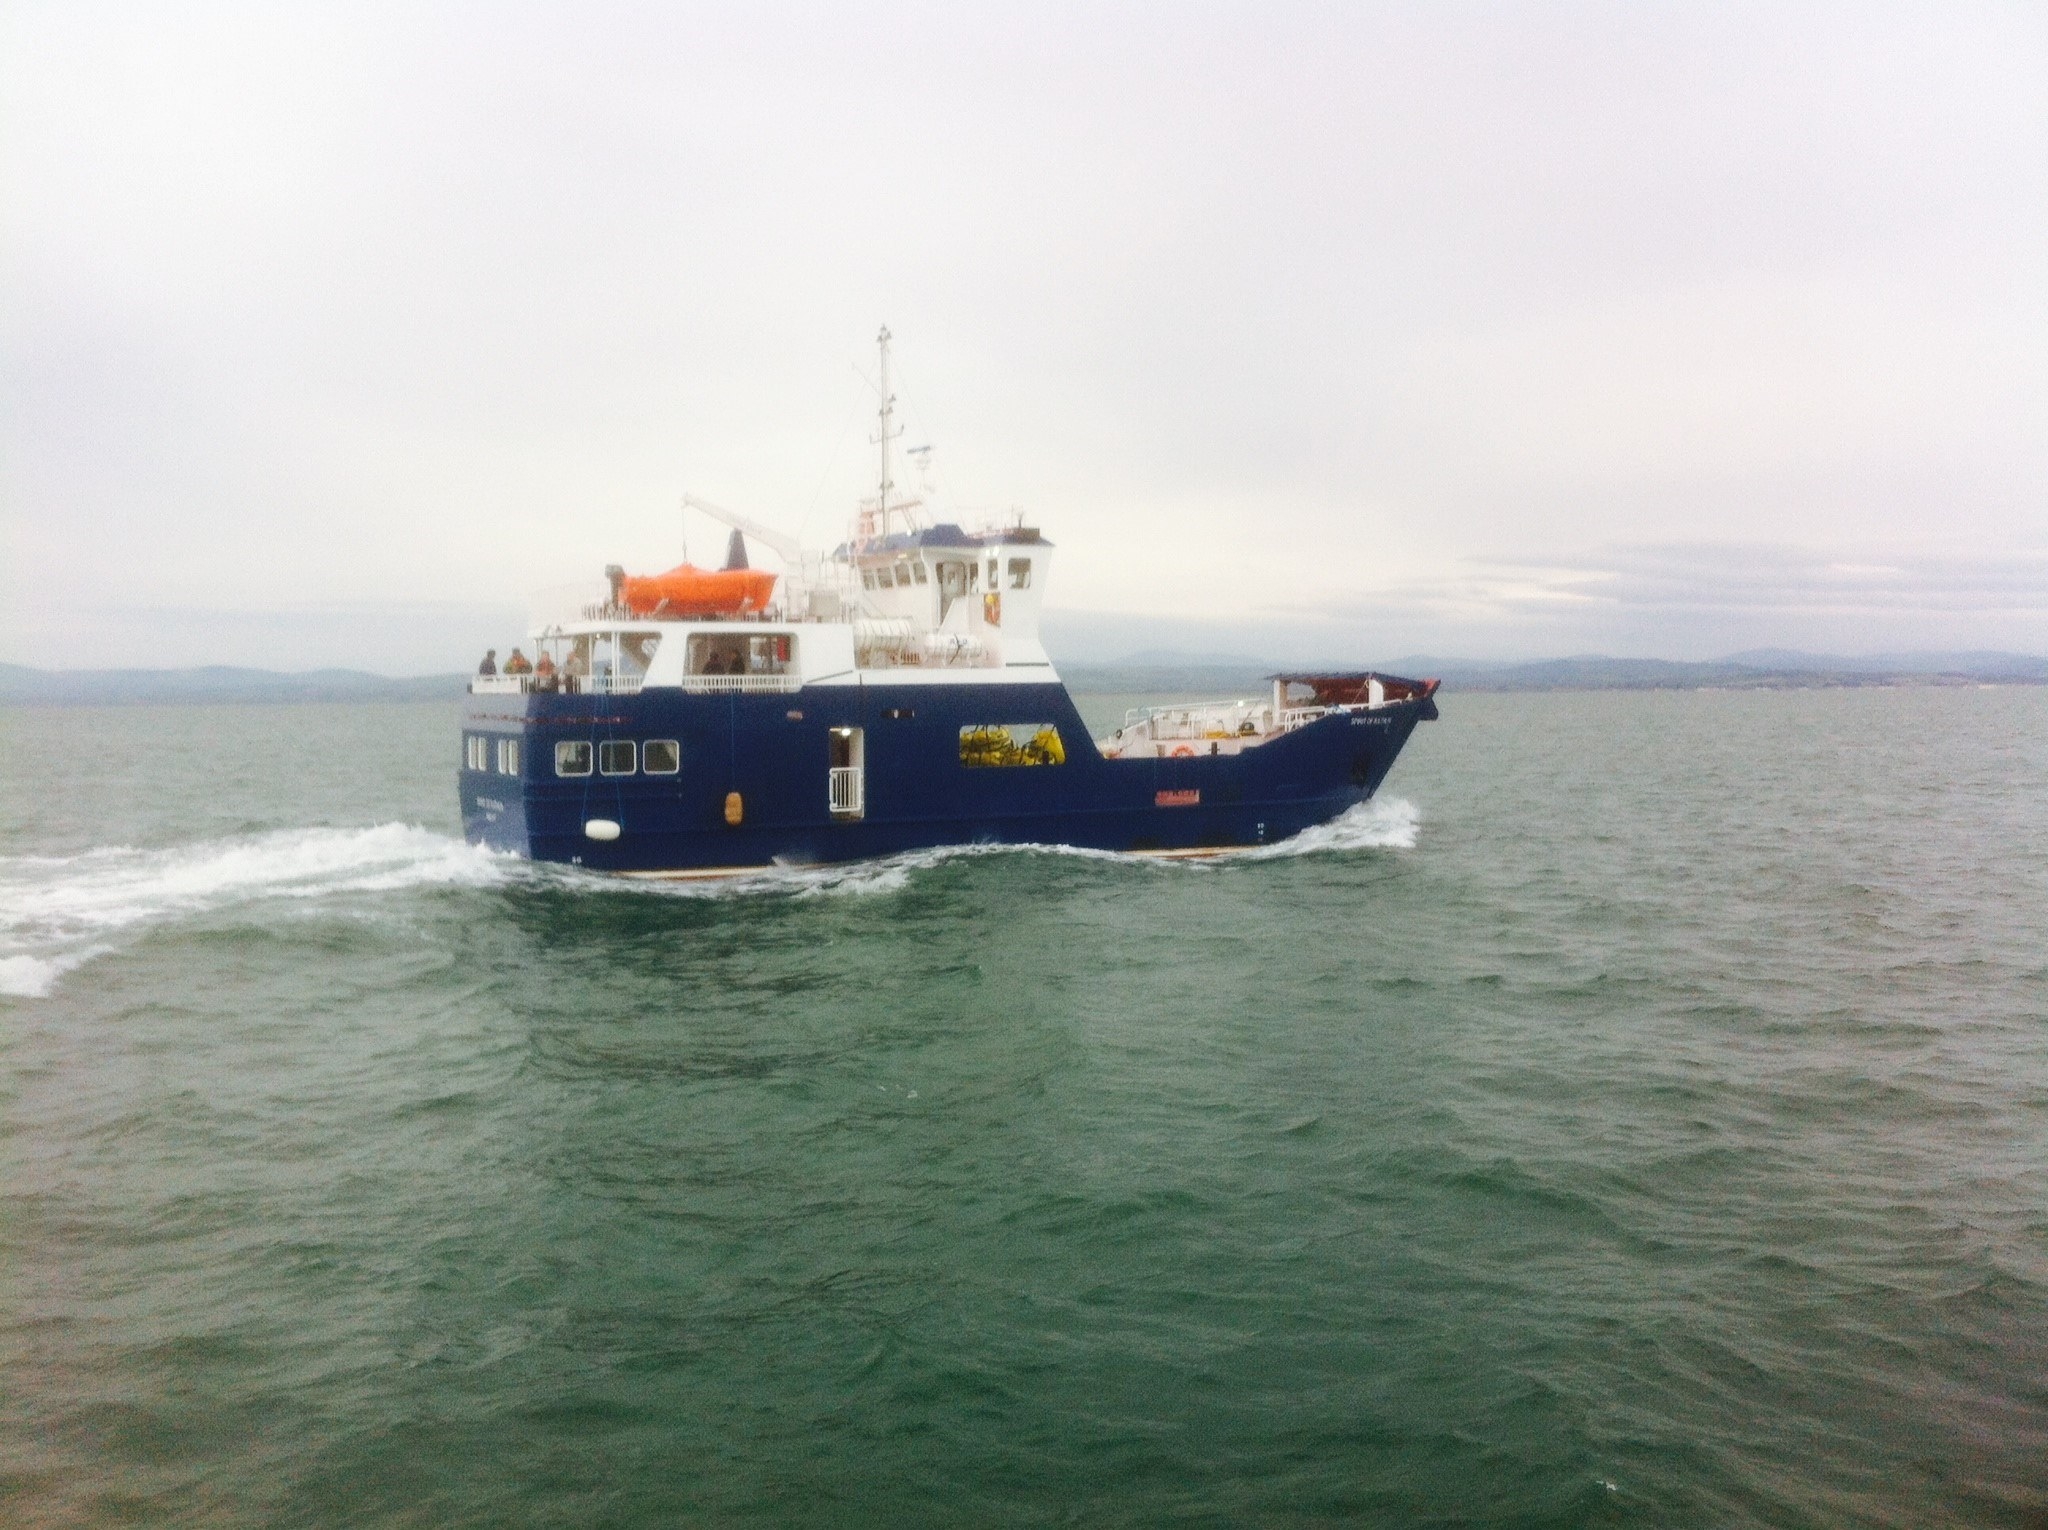 Spirit of Rathlin on her first day of sea trials. Courtesy of Arklow Marine Services.